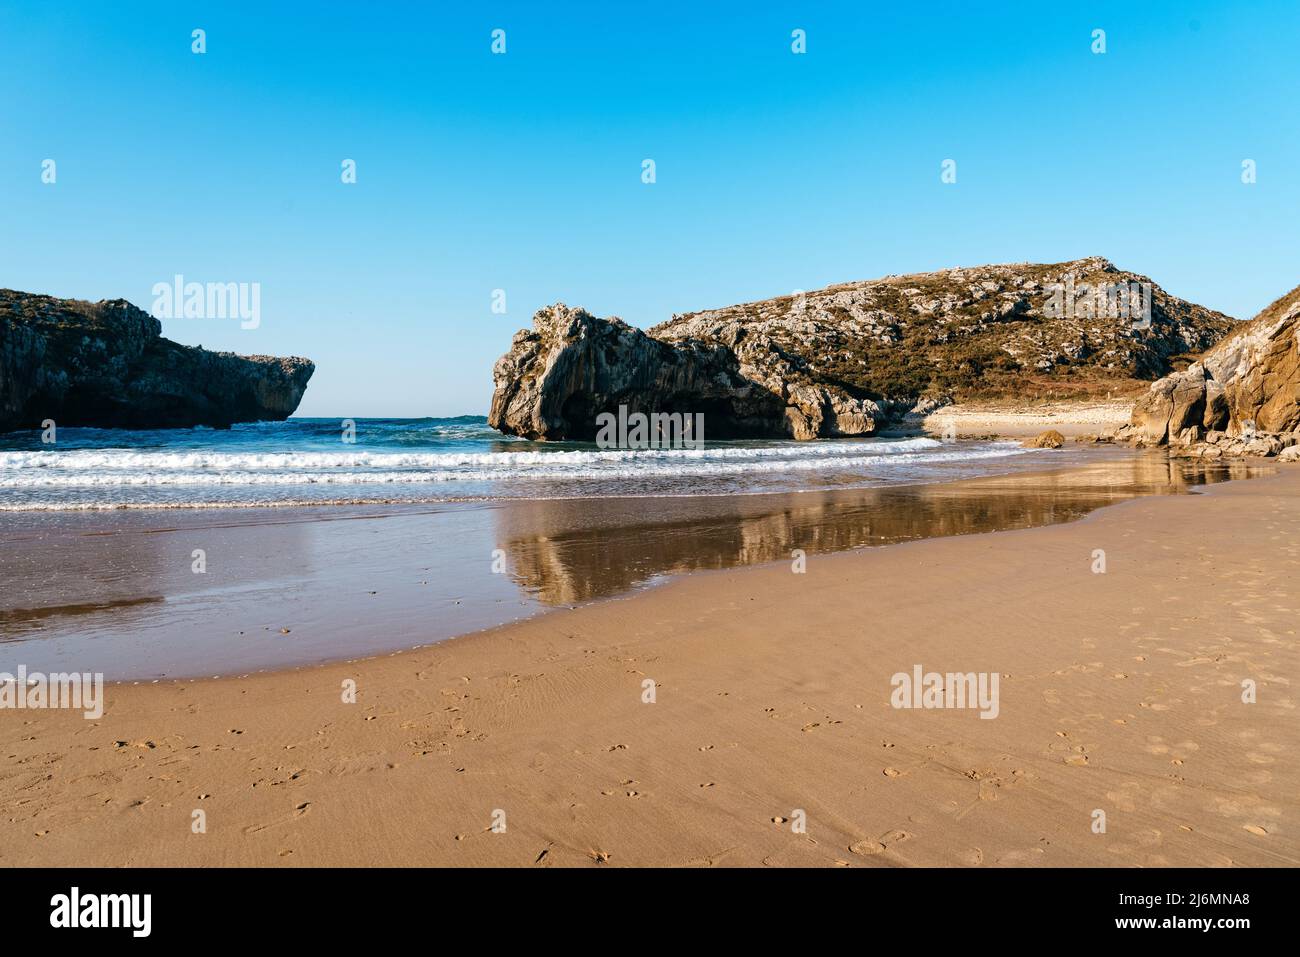 Beach of Cuevas del Mar, Caves of the sea, Llanes, Asturias, Spain. Long exposure, sunny day with bright blue sky. Stock Photo